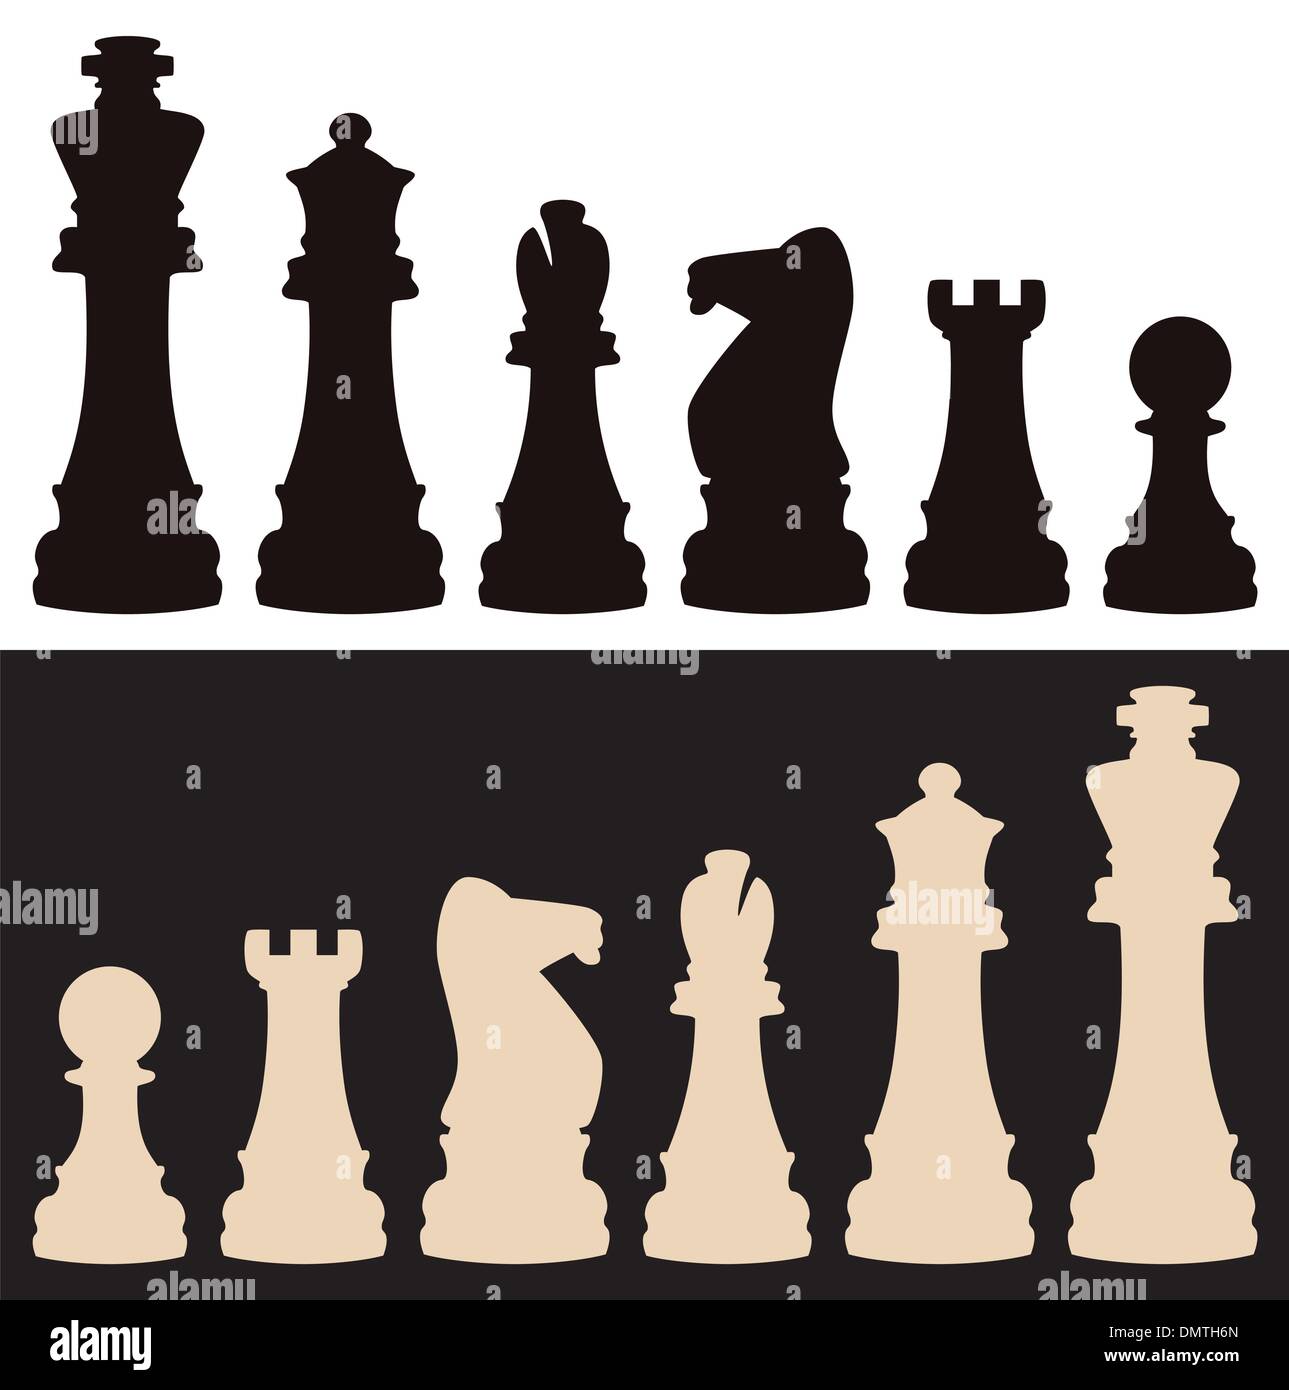 Chess Grandmaster Player Analysis Abstract Concept Vector Graphic Design  Illustration Element Stock Illustration - Download Image Now - iStock